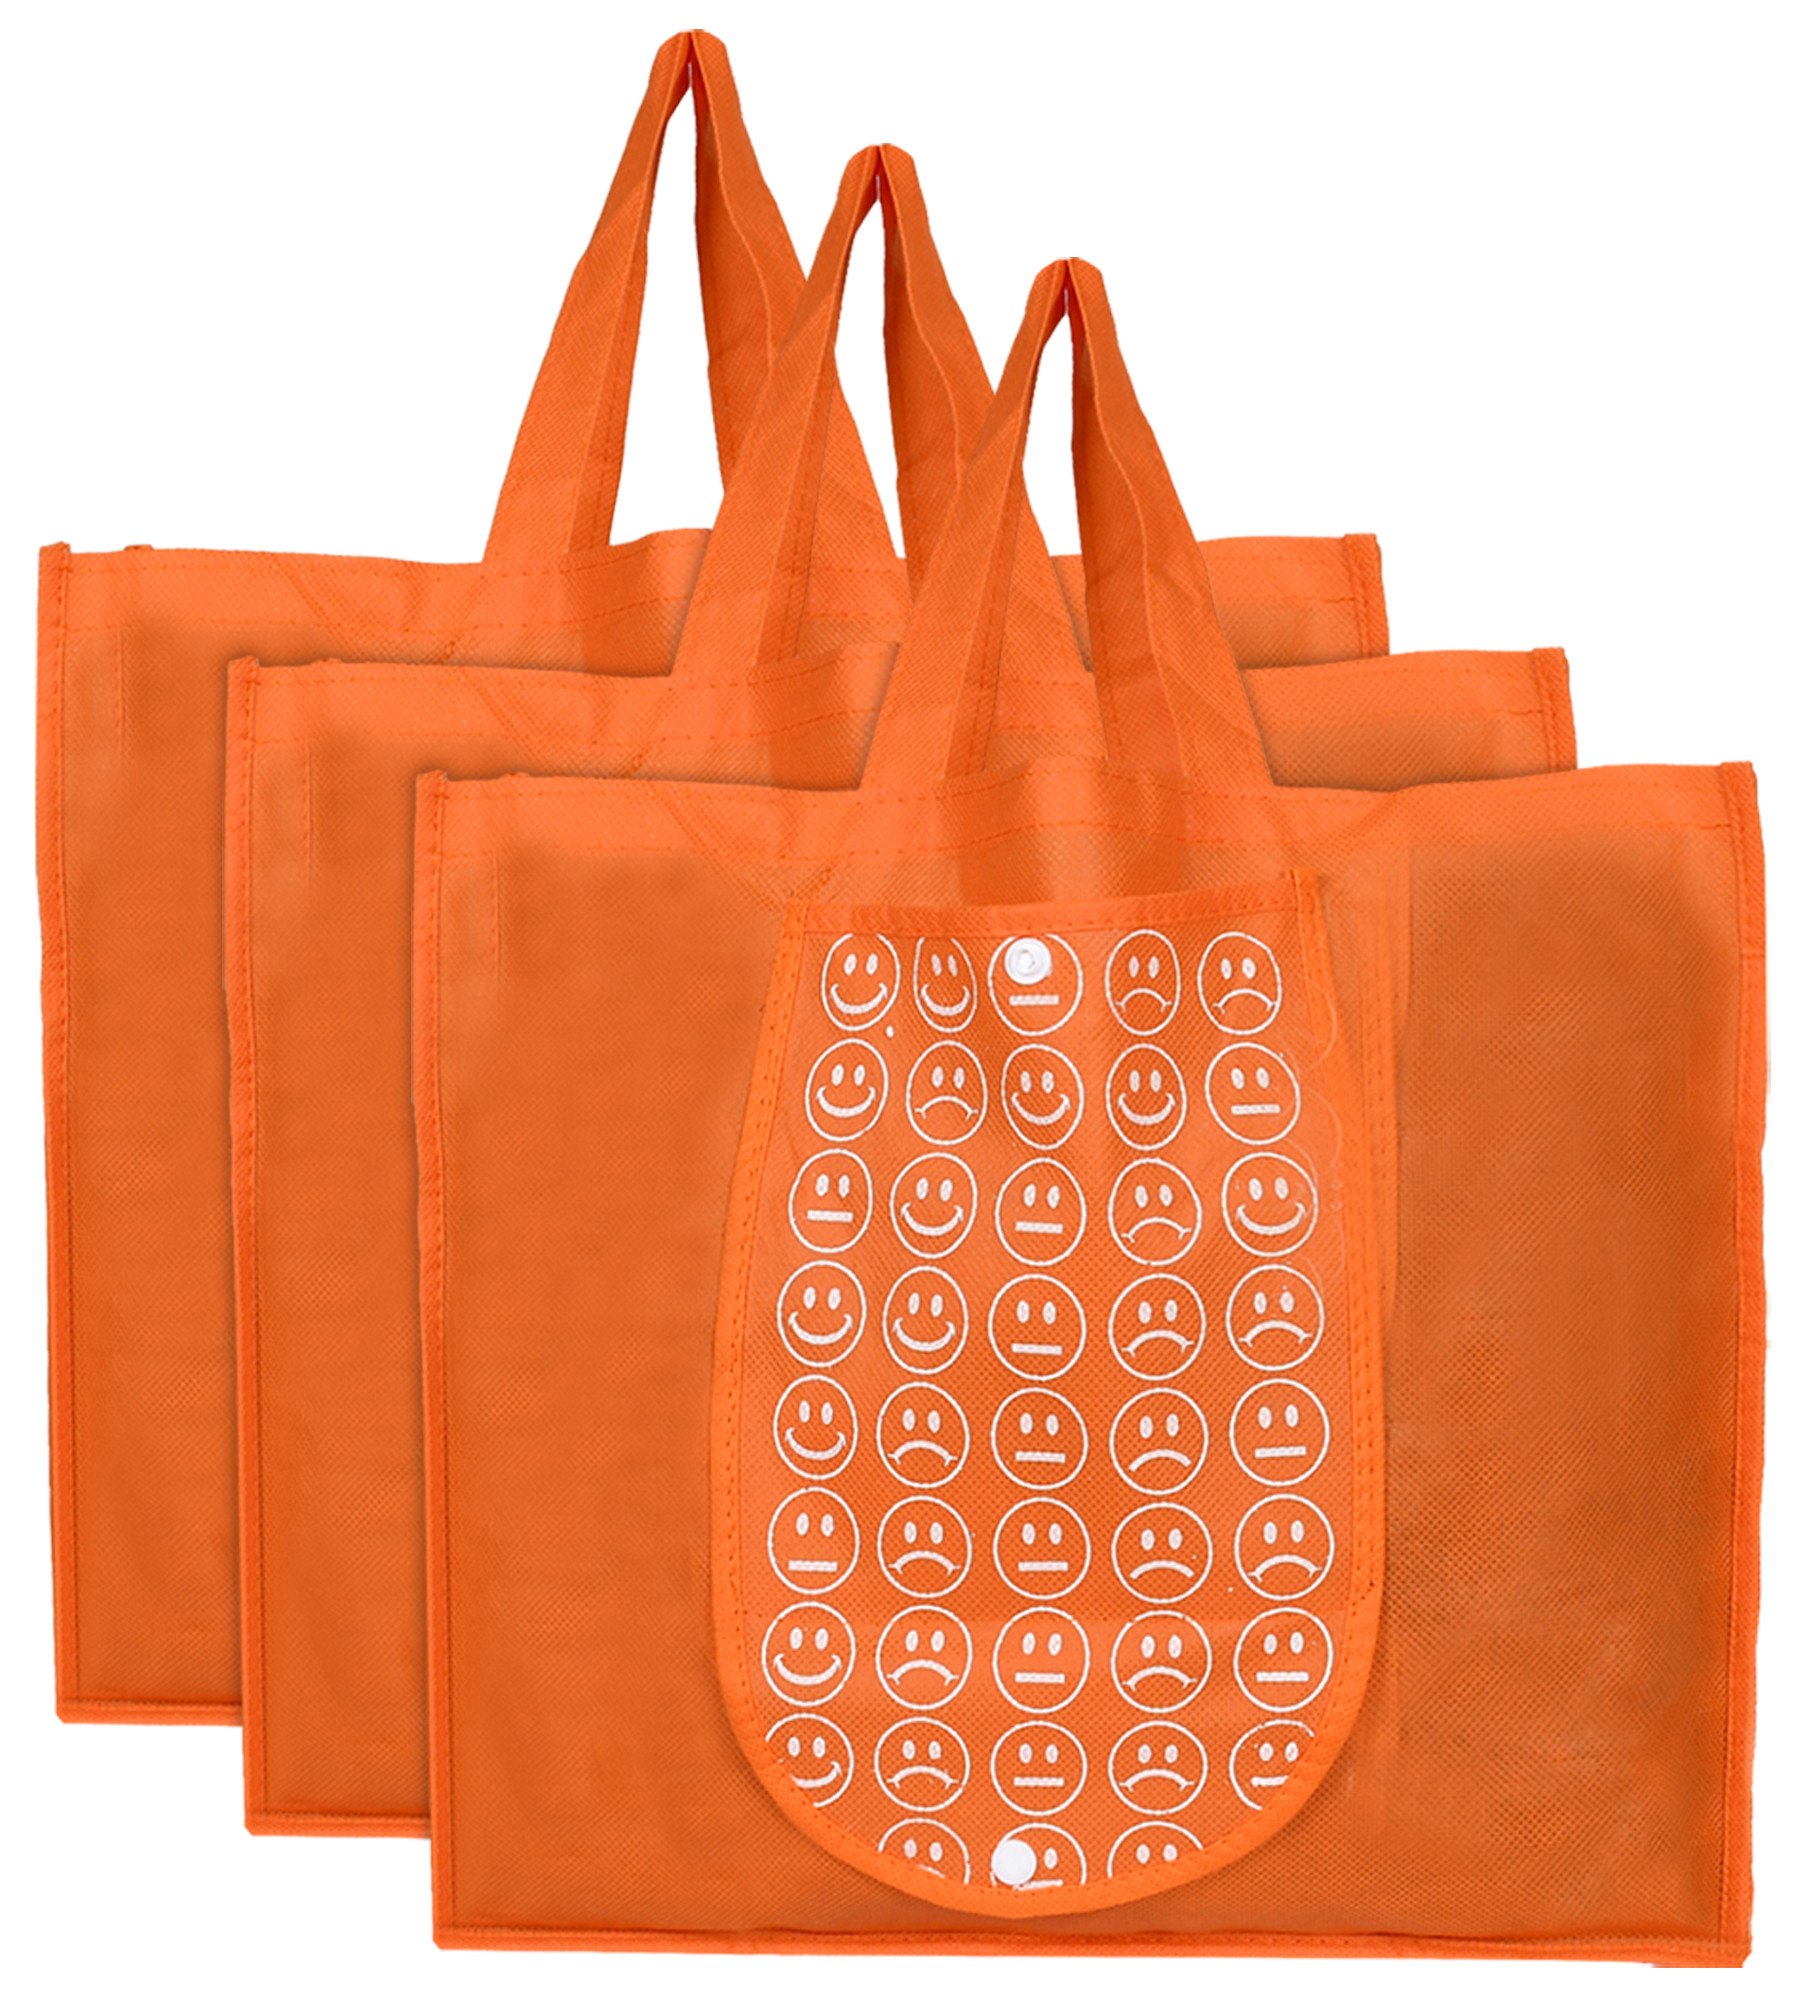 Kuber Industries Shopping Grocery Bags Foldable, Washable Grocery Tote Bag with One Small Pocket, Eco-Friendly Purse Bag Fits in Pocket Waterproof & Lightweight (Orange)